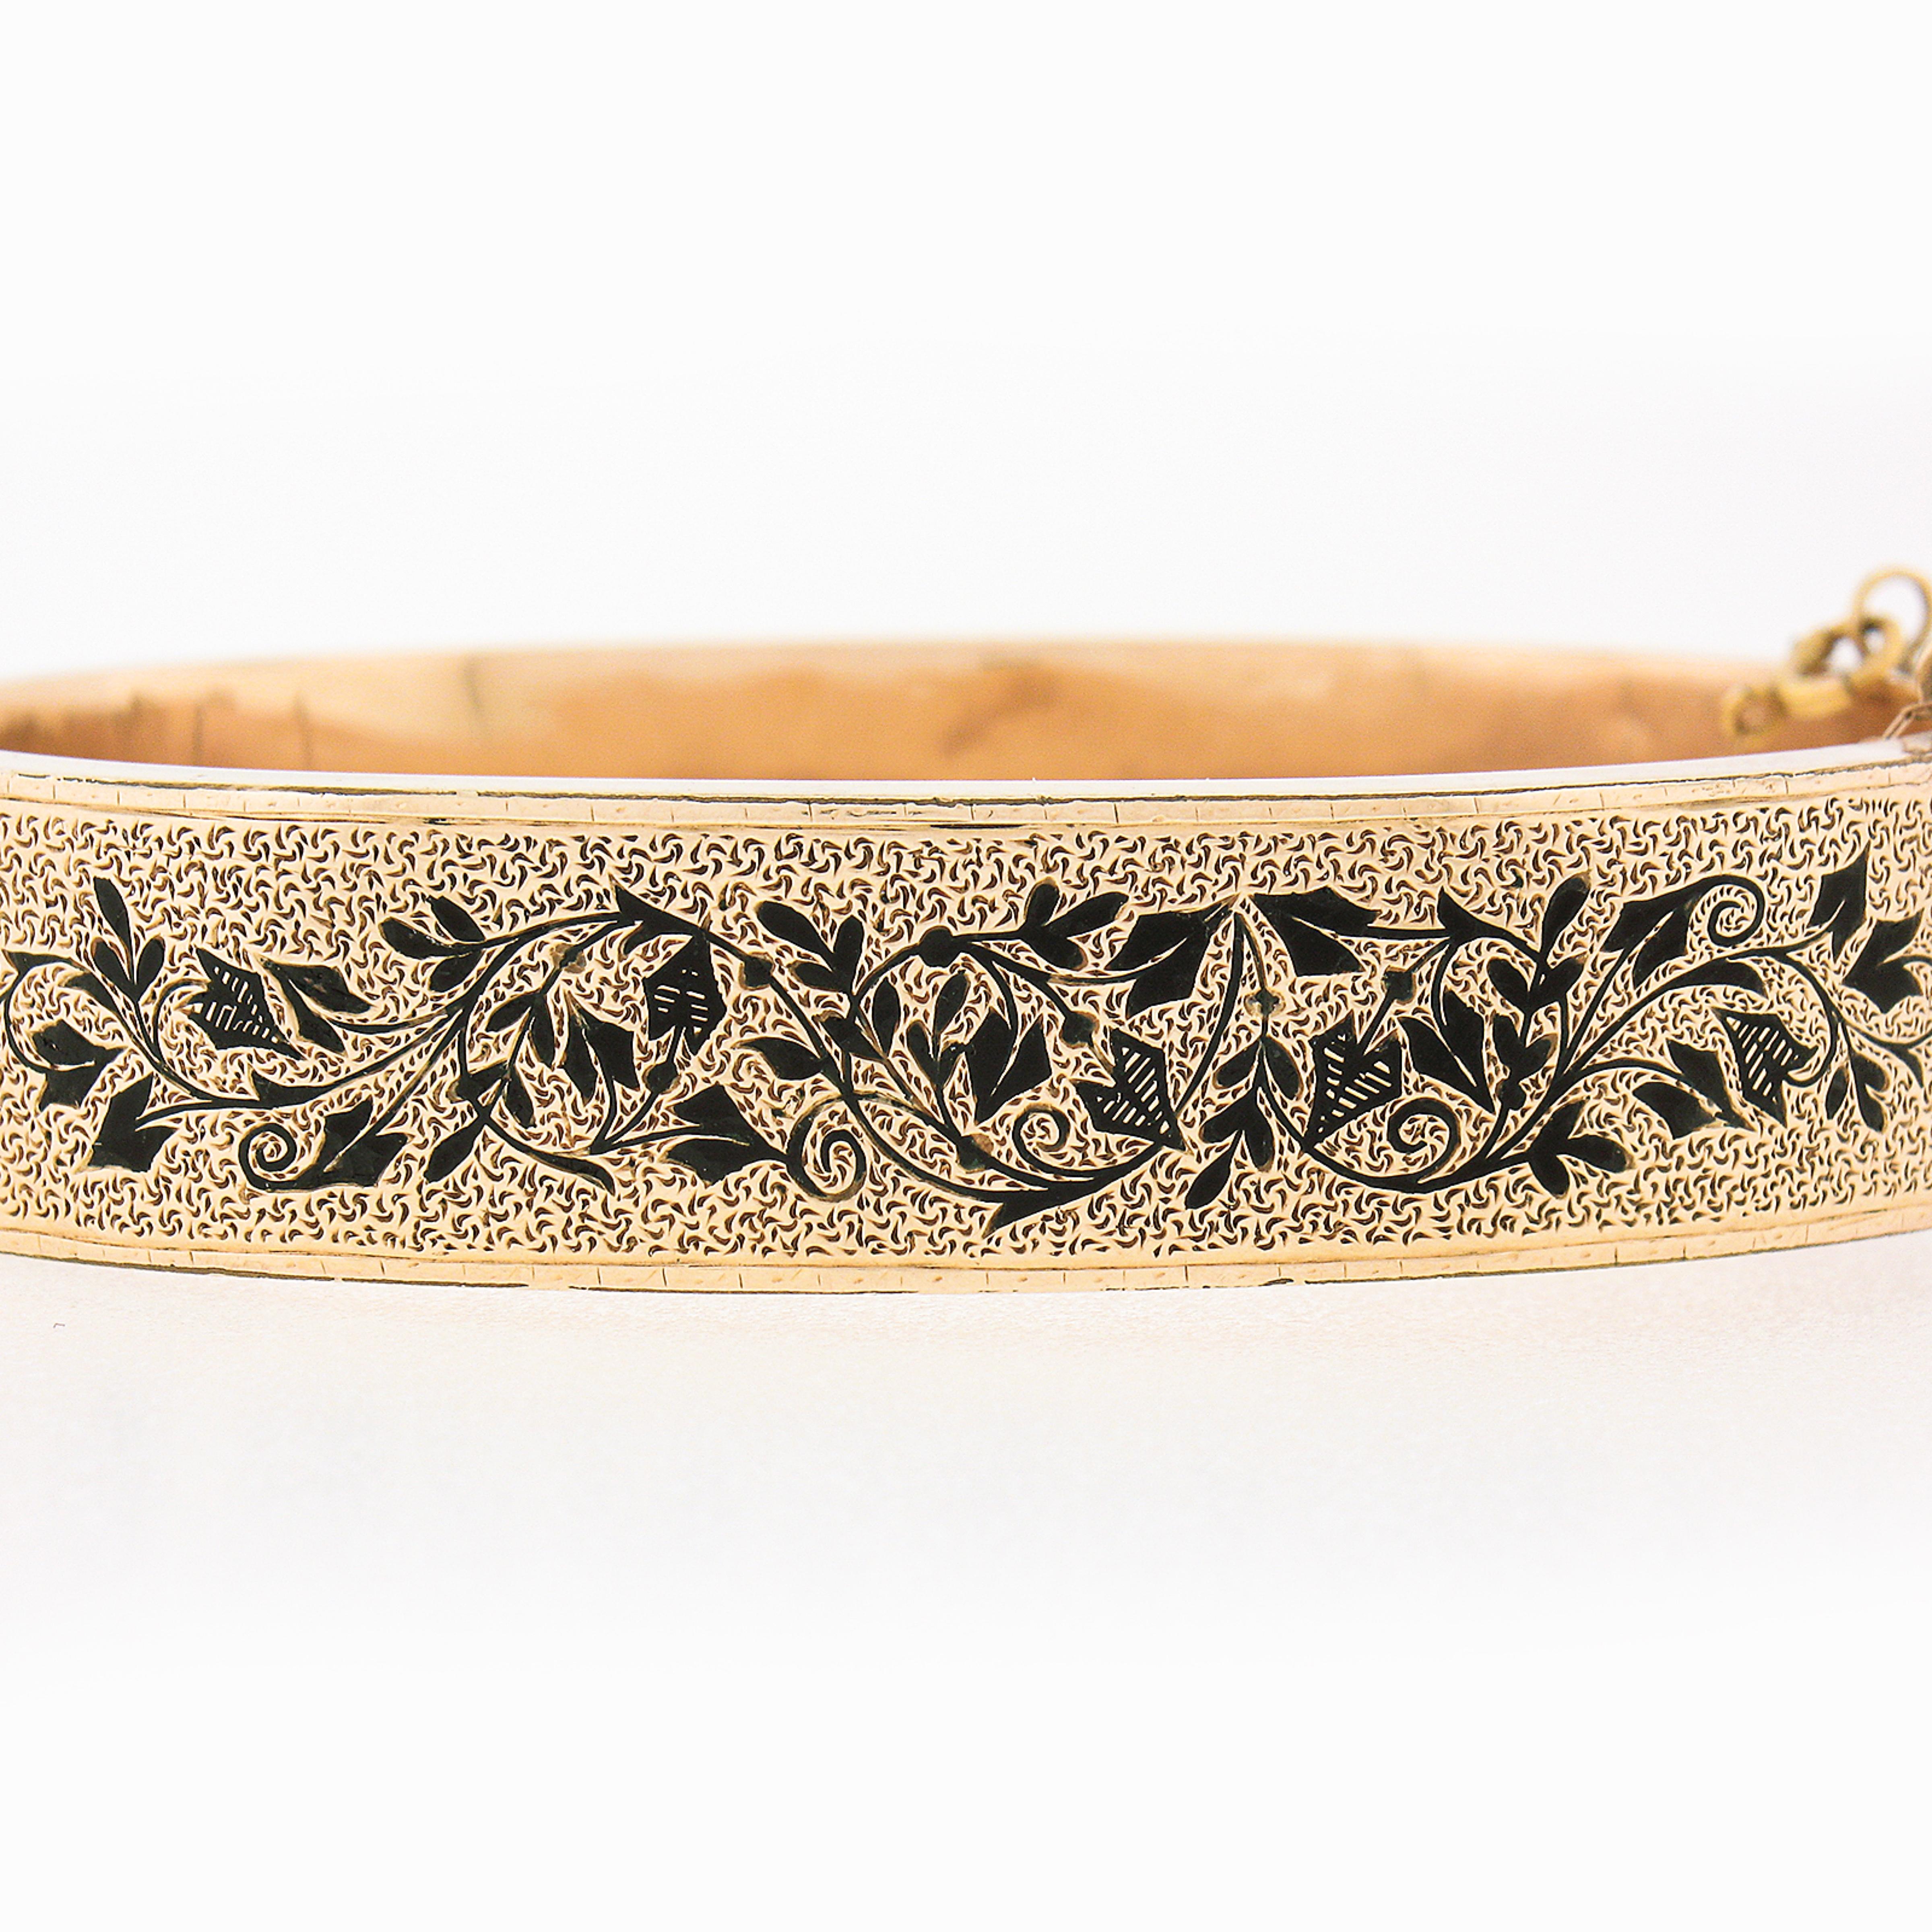 This unique and absolutely gorgeous antique bangle bracelet was crafted in solid 14k gold during the Victorian period and features a wide design covered with incredible textured work throughout, and adorned with two sides of very fine and neat black